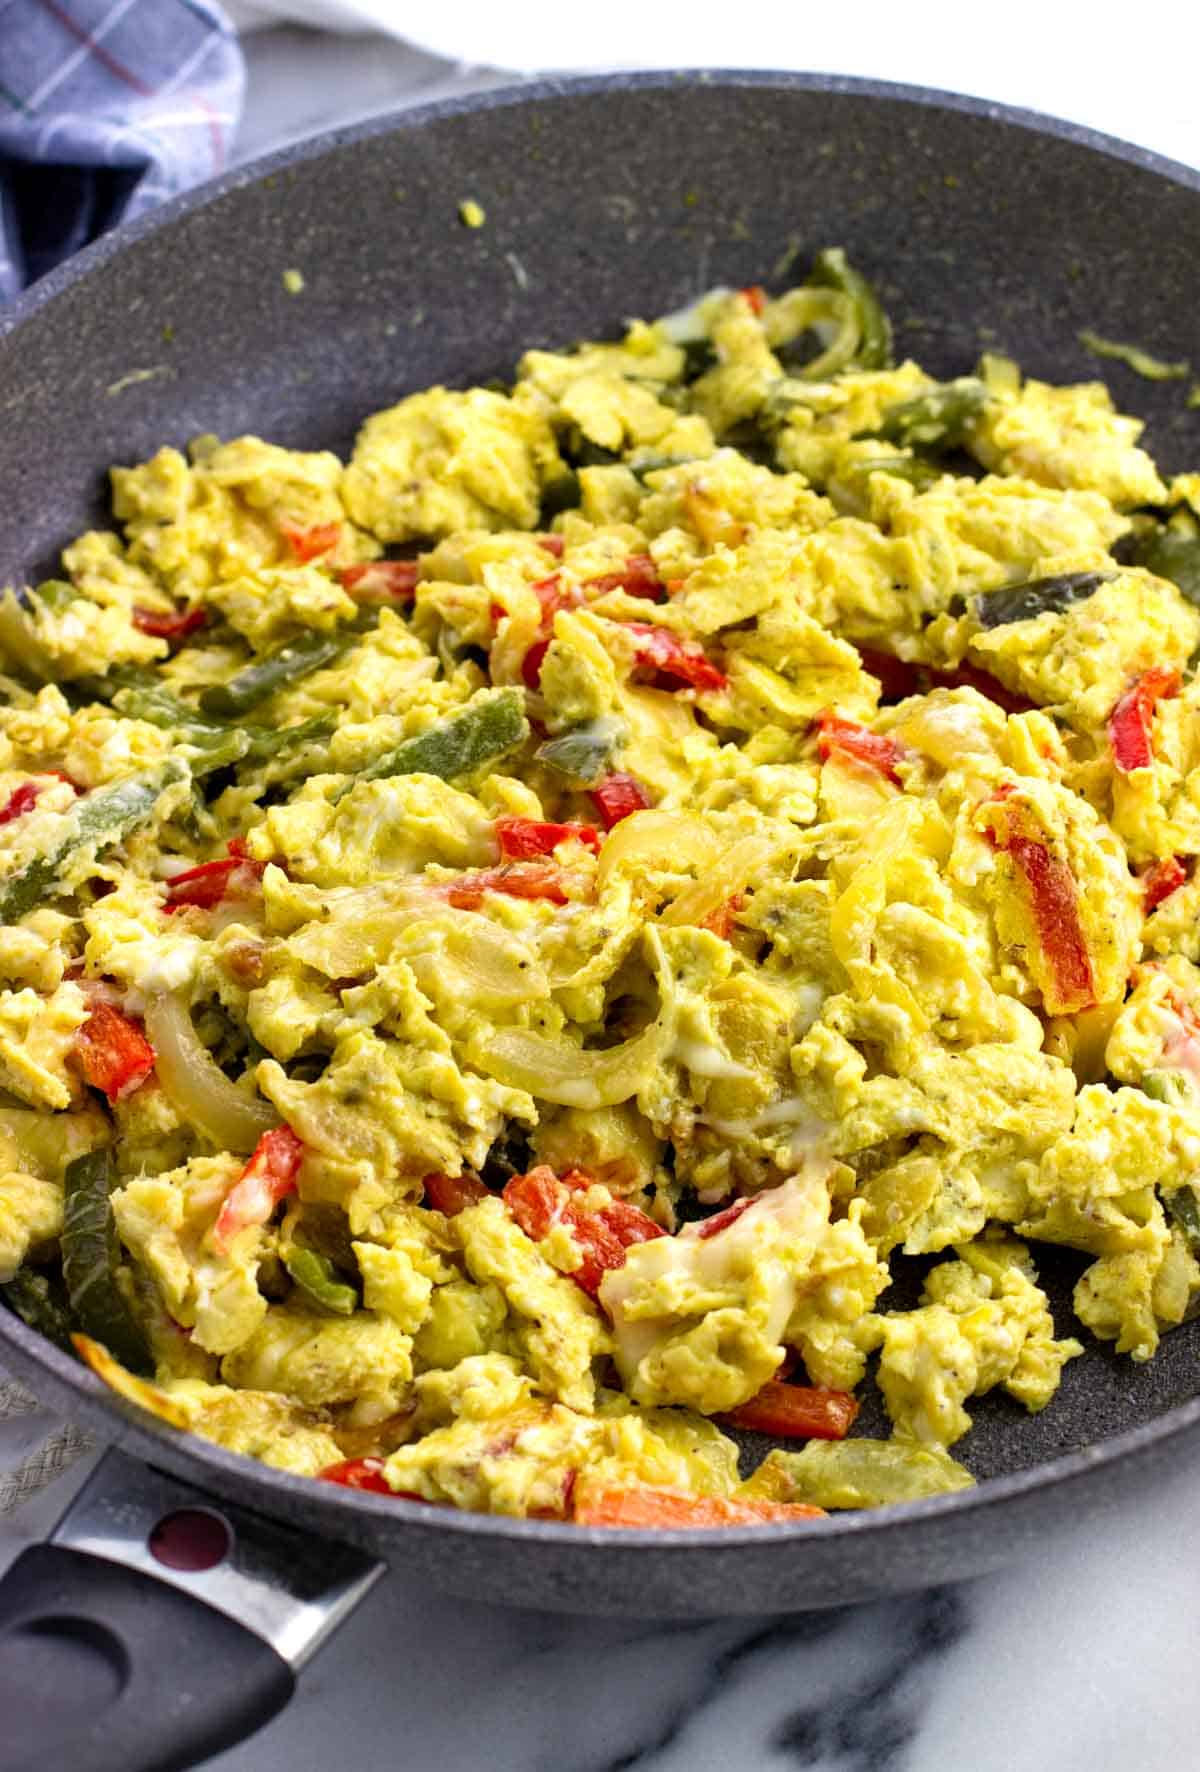 Scrambled peppers and eggs in a skillet.